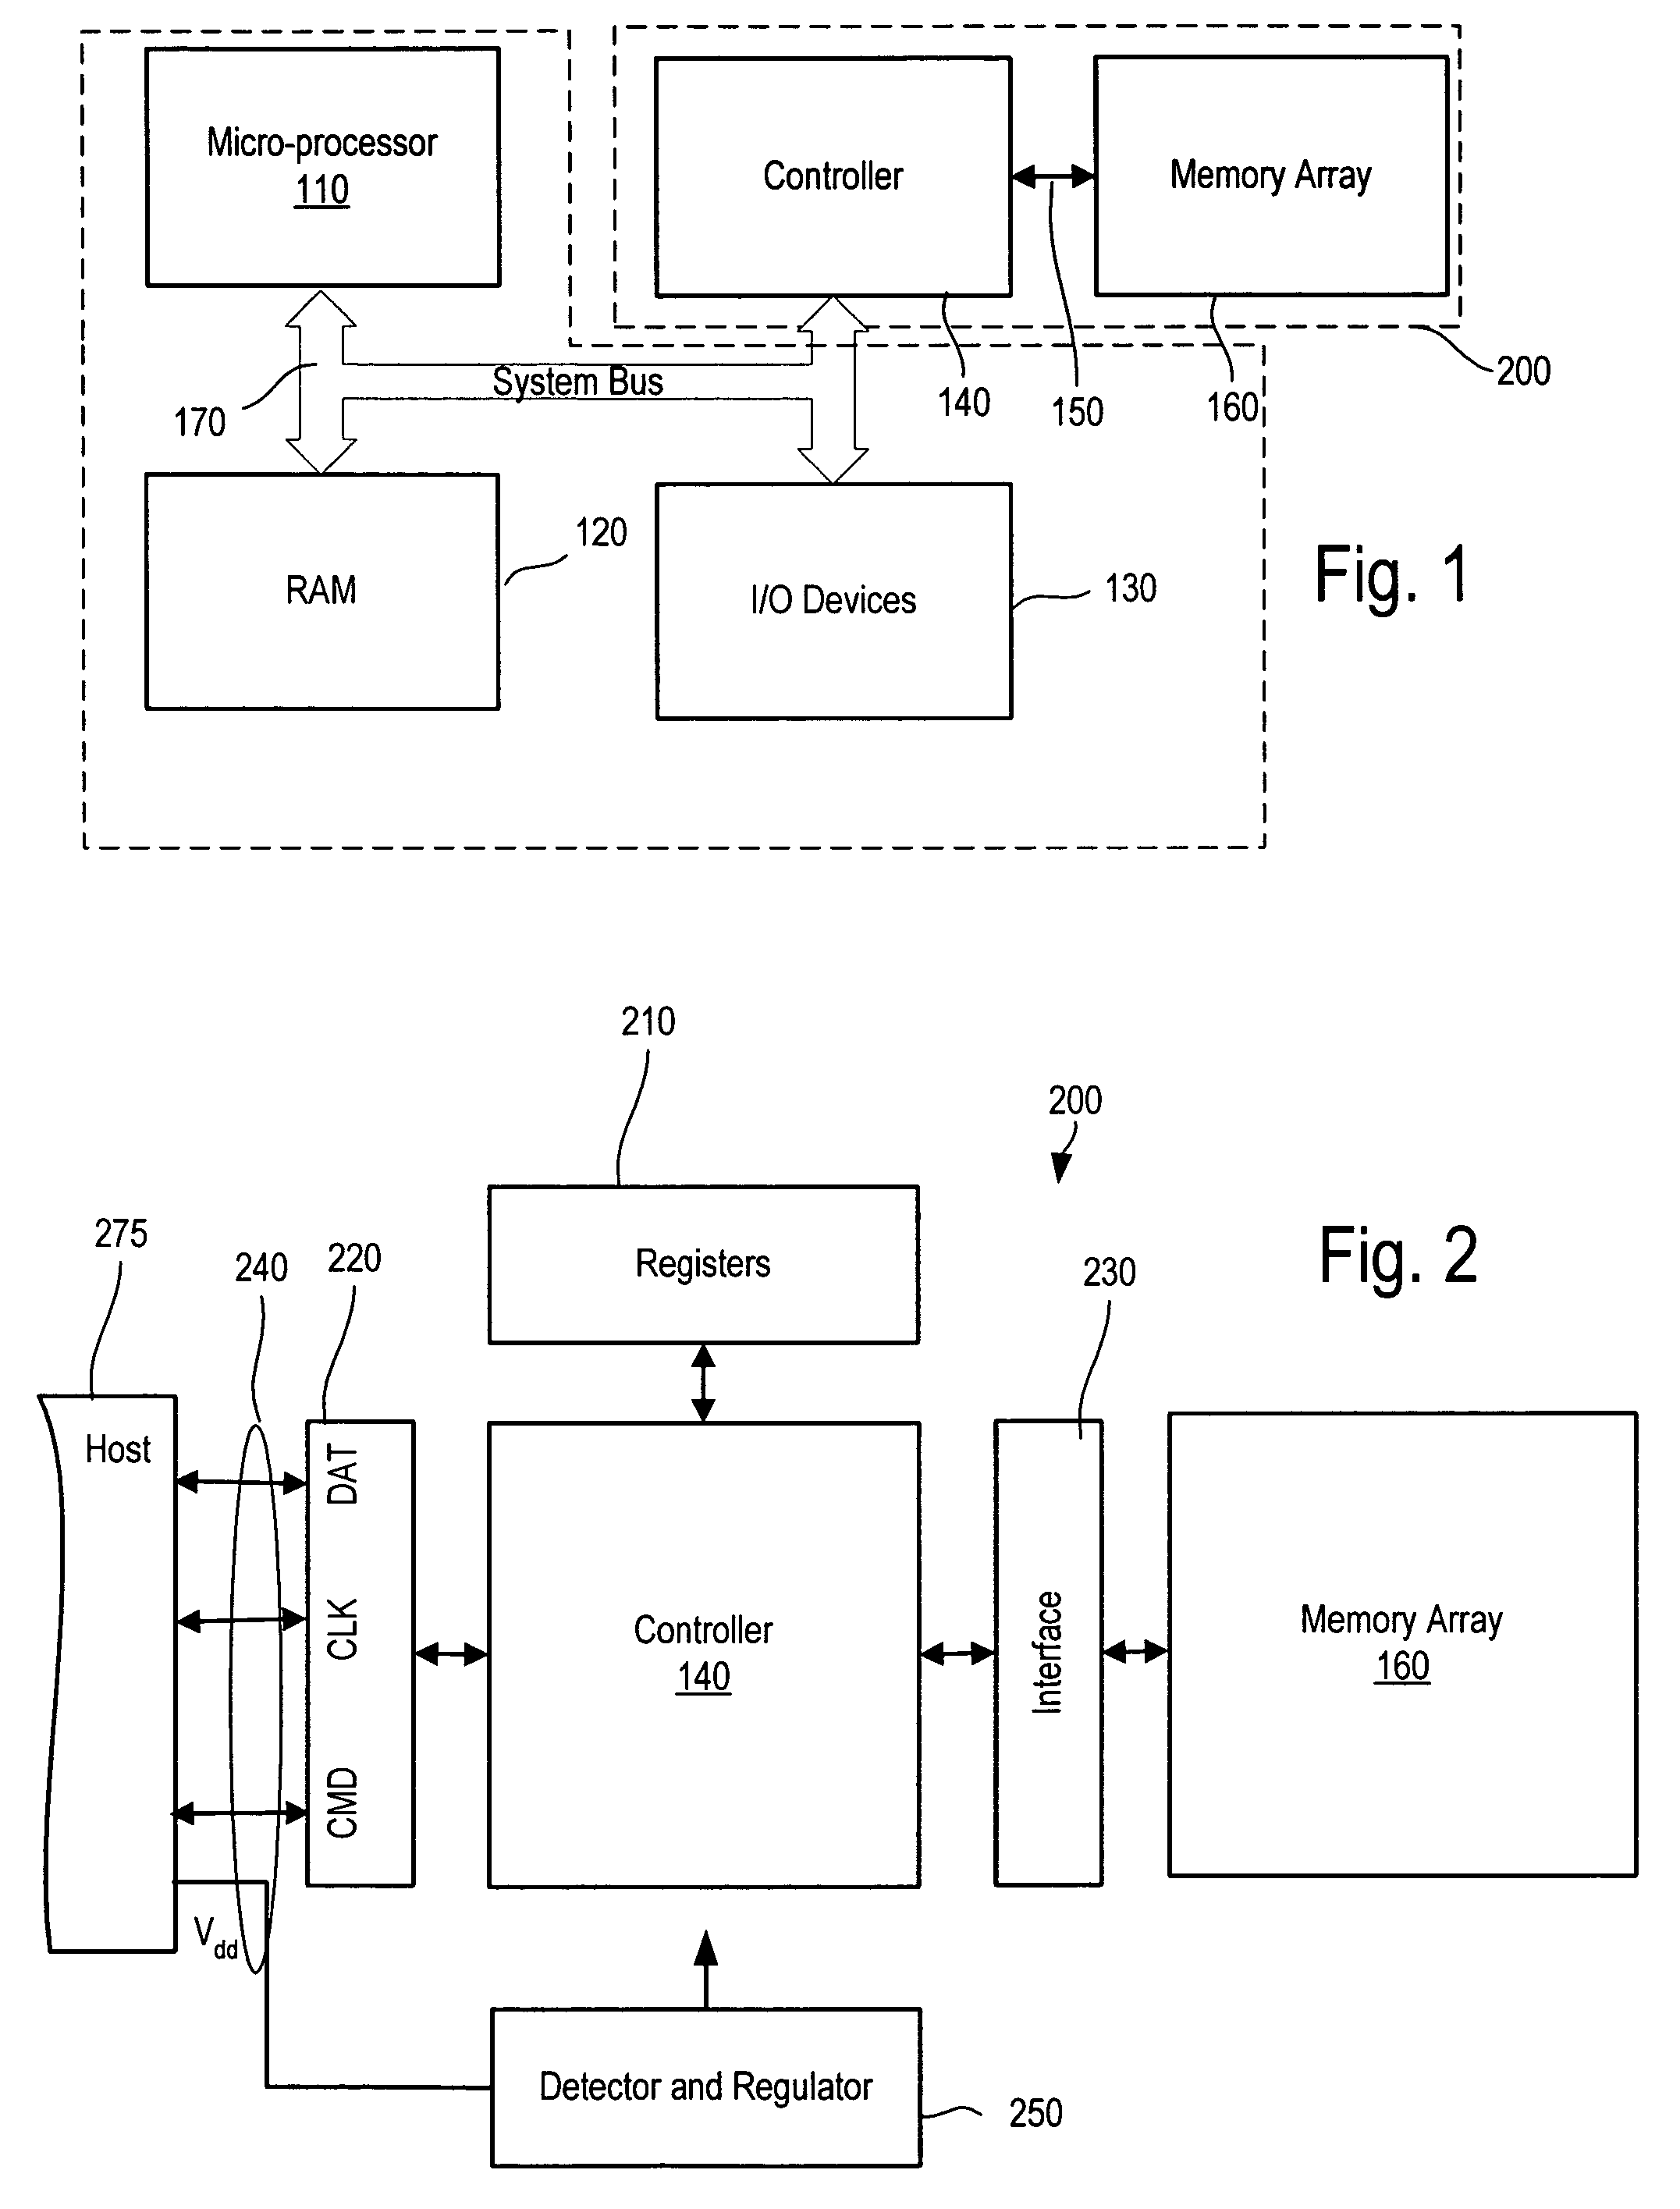 Voltage regulator with bypass for multi-voltage storage system